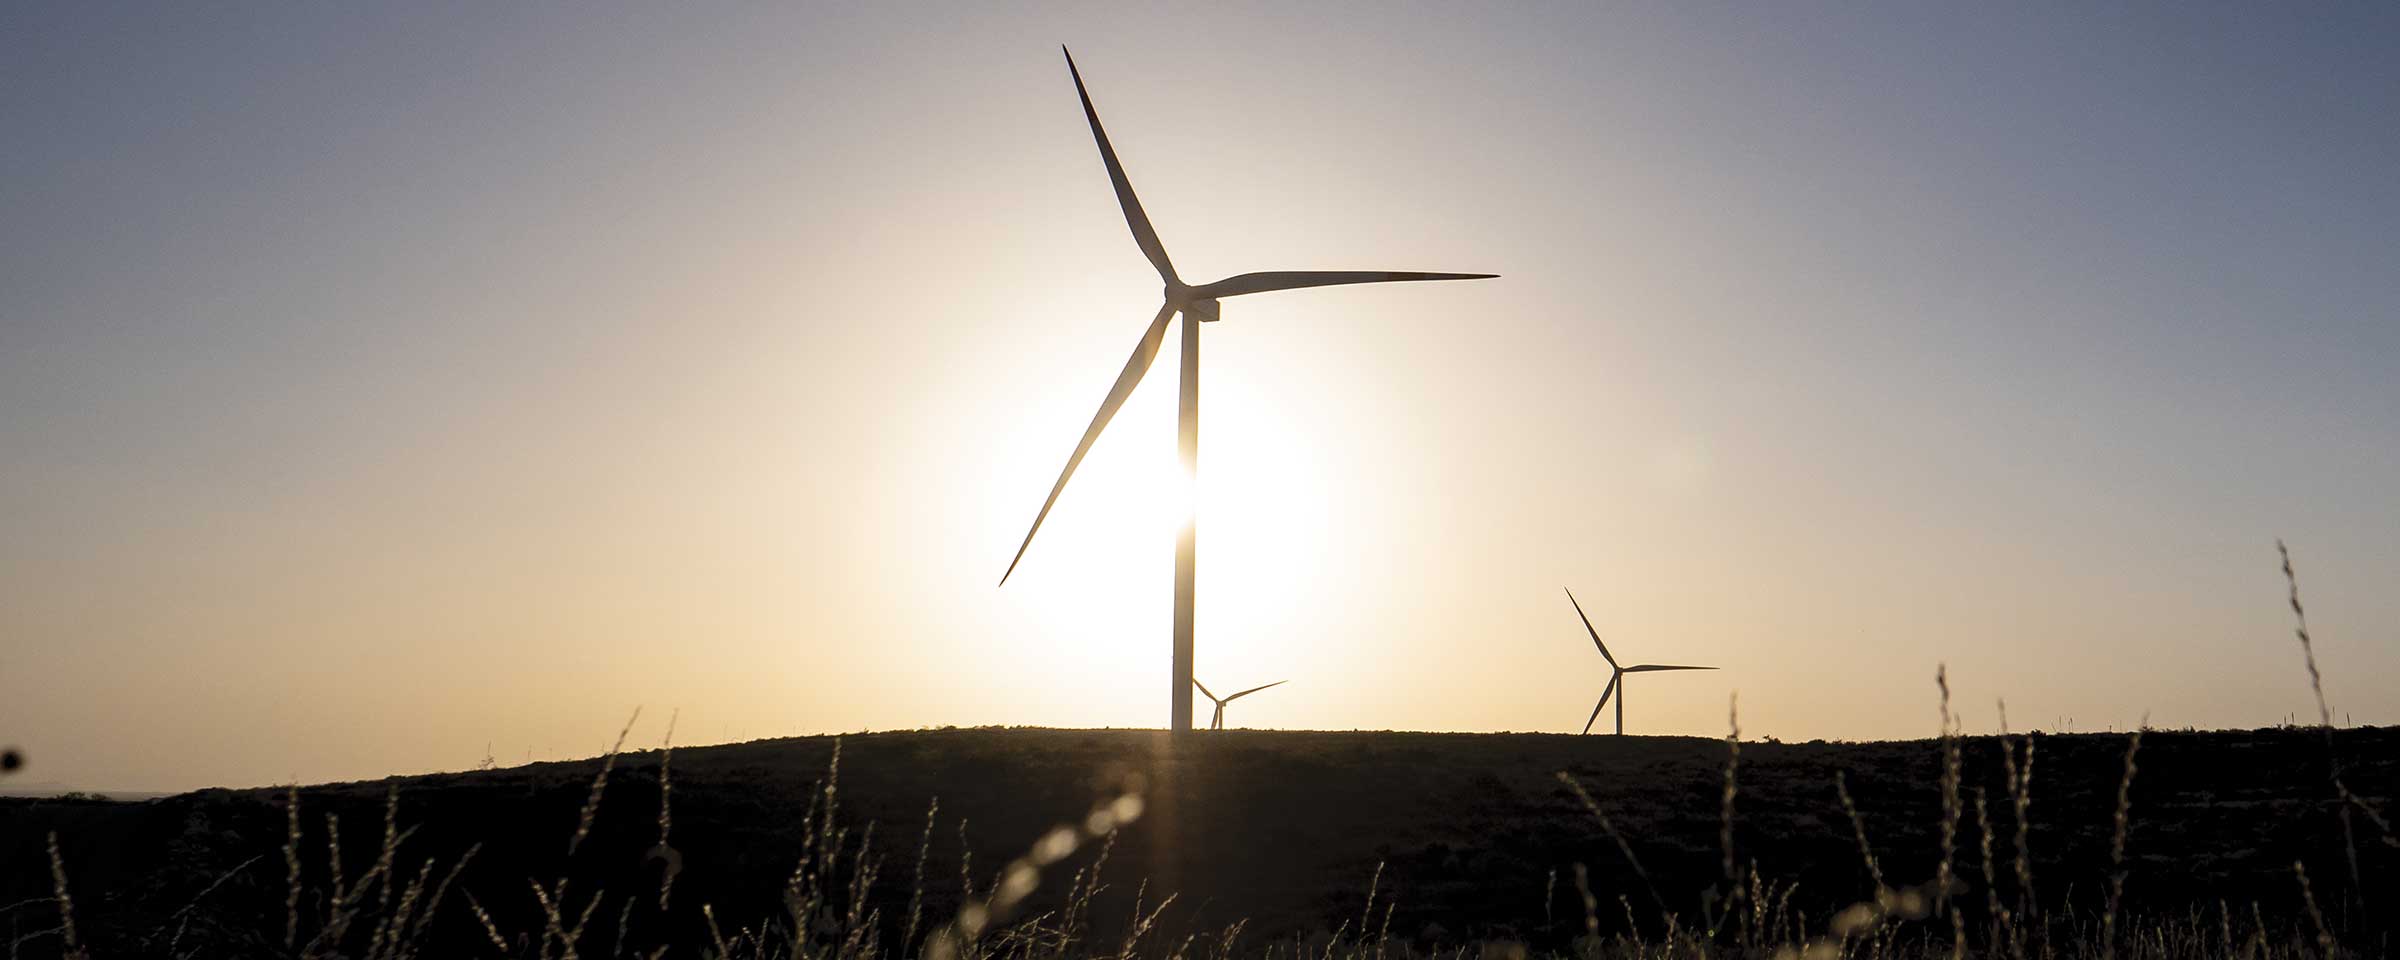 Enel is electrifying the rural area surrounding its new wind plant in South  Africa